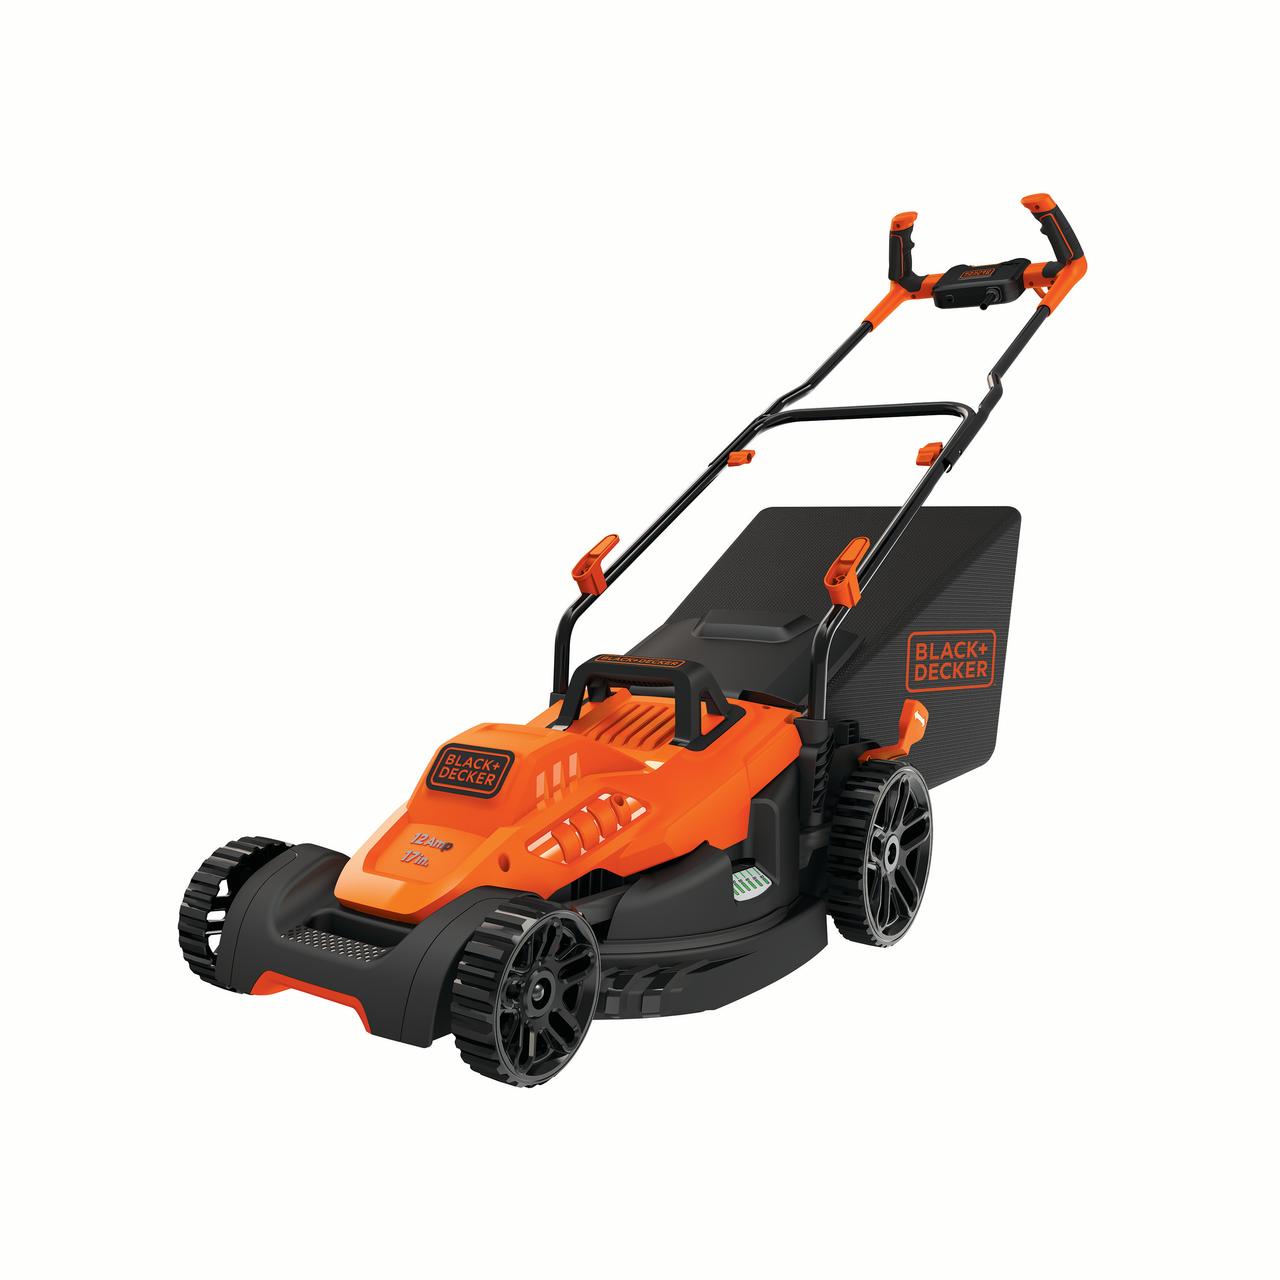 BLACK+DECKER BEMW472BH 10AMP 15 Electric Mowe, Lightweight and easy to maneuver, this electric lawn mower features a Comfort Grip Handle and peak performance with Winged Blade for 30% better - image 1 of 13